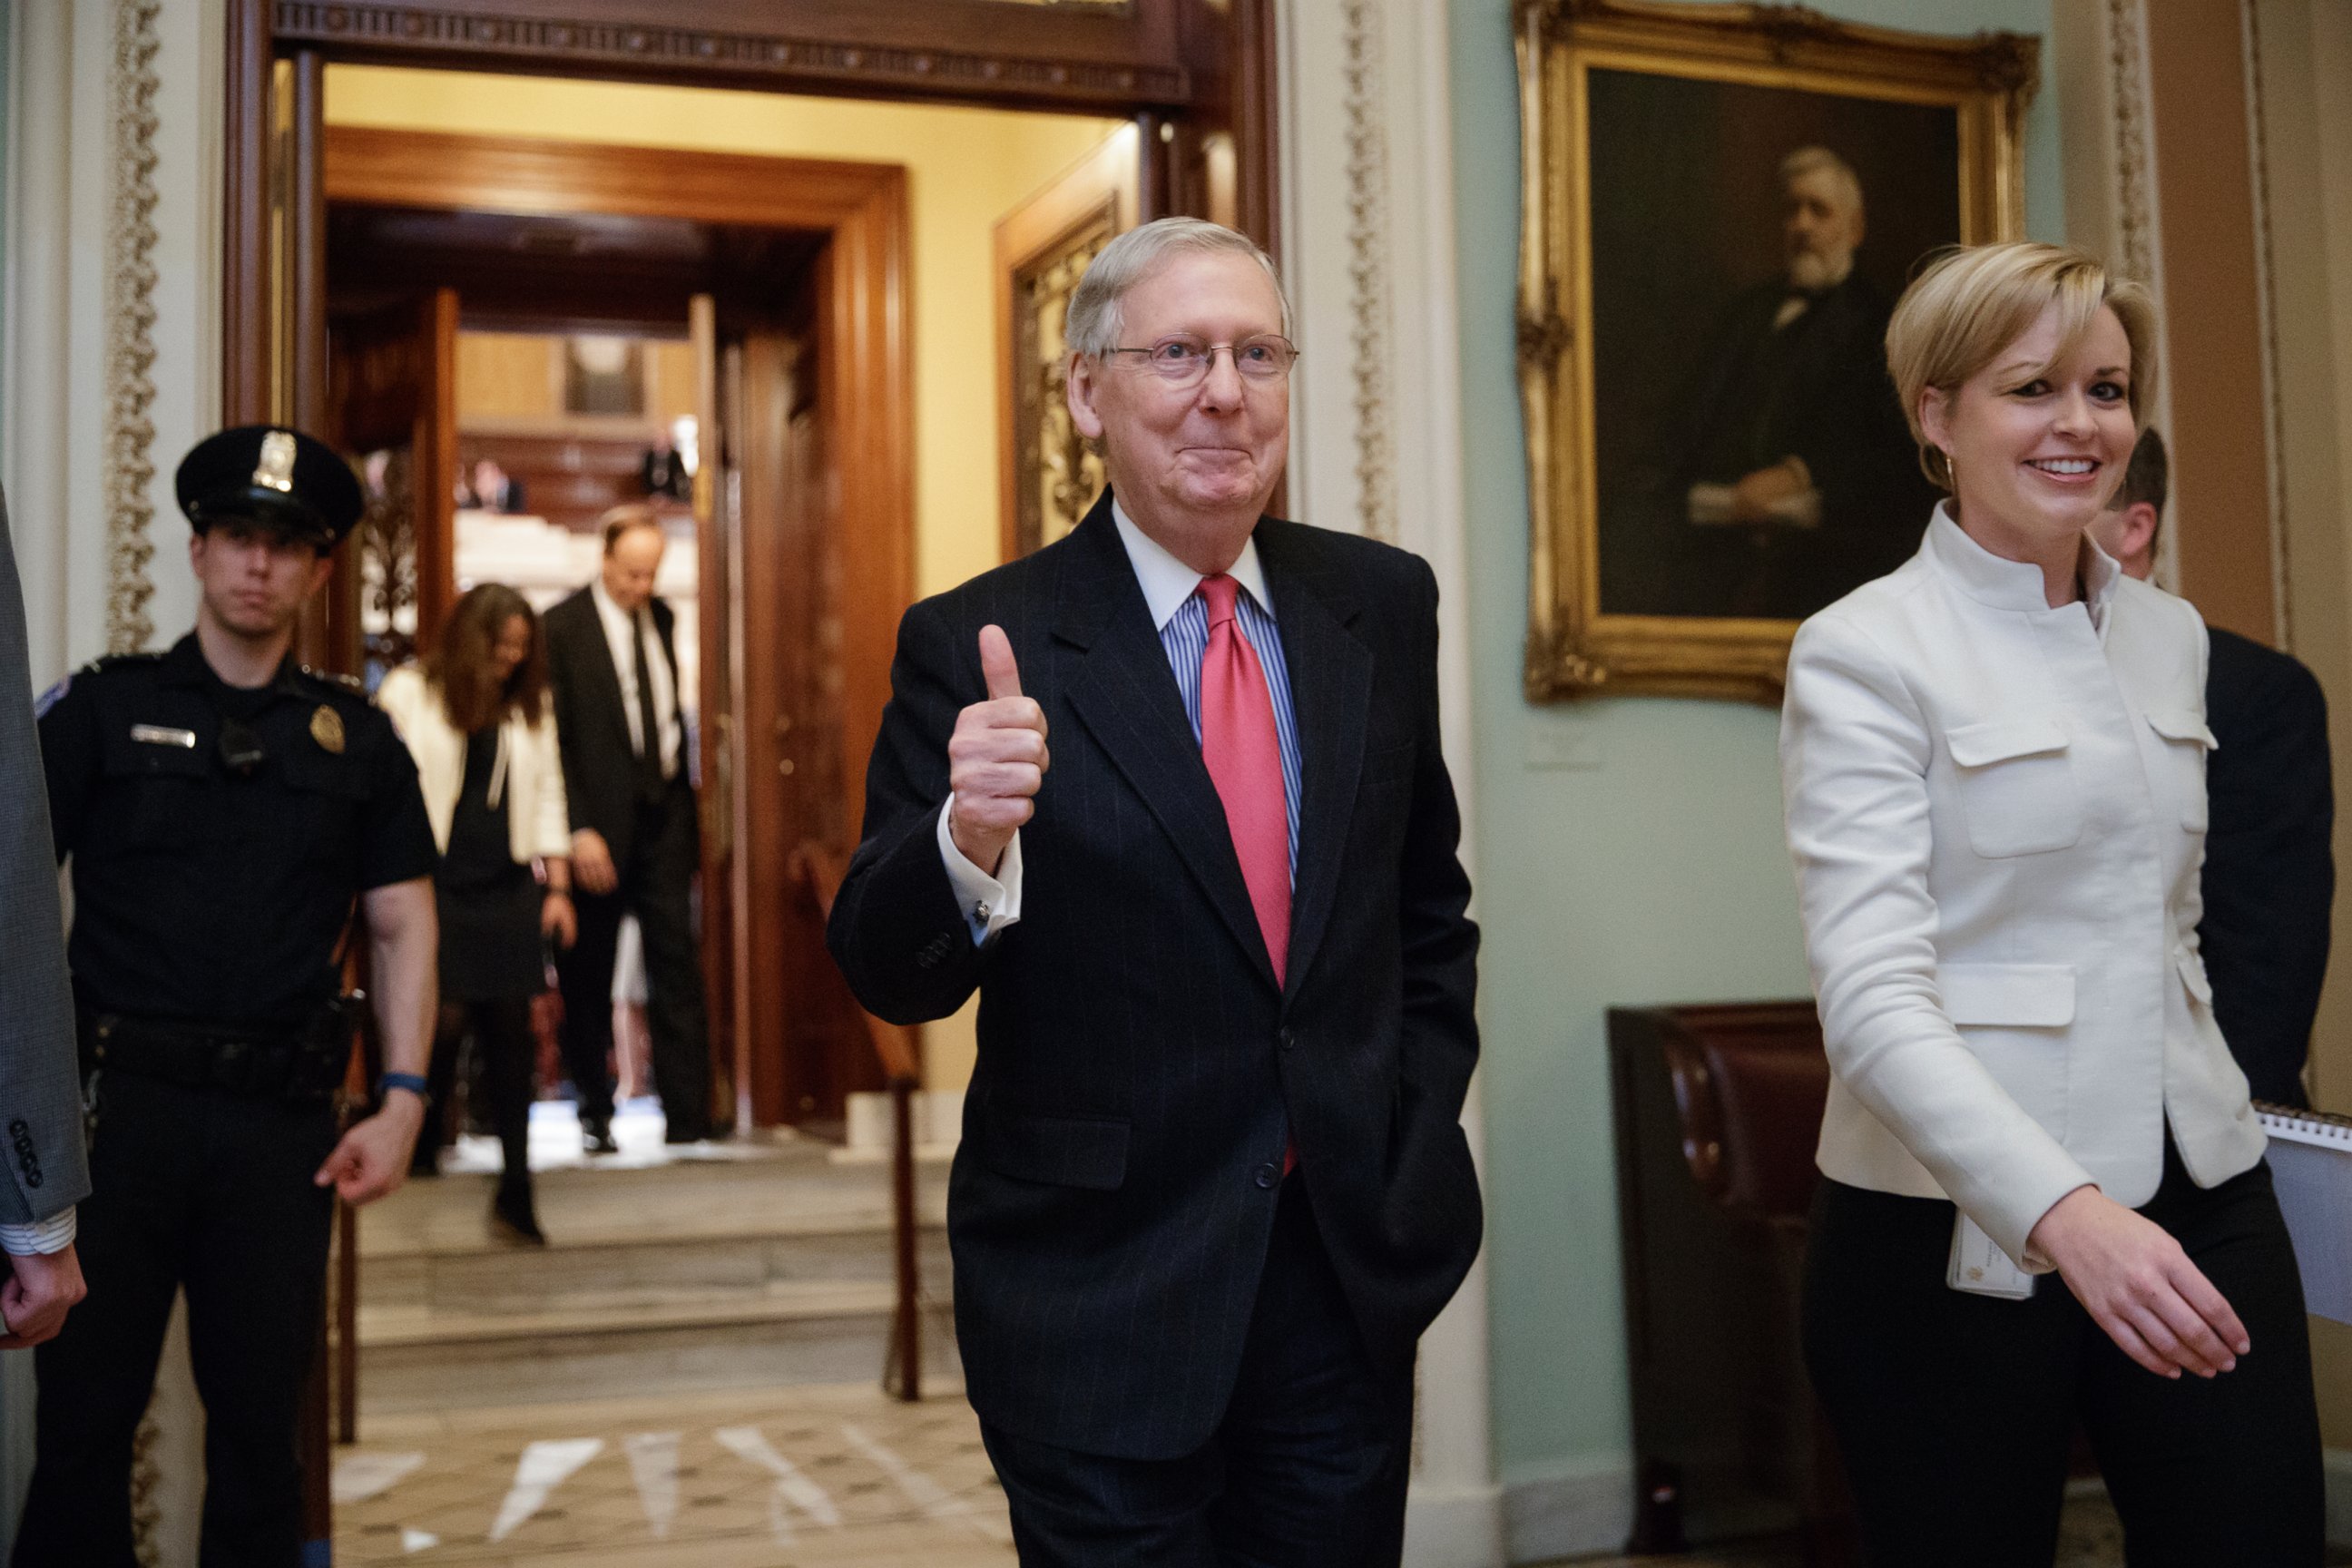 PHOTO: Senate Majority Leader Mitch McConnell signals a thumbs-up as he leaves the Senate chamber on Capitol Hill in Washington, April 6, 2017.